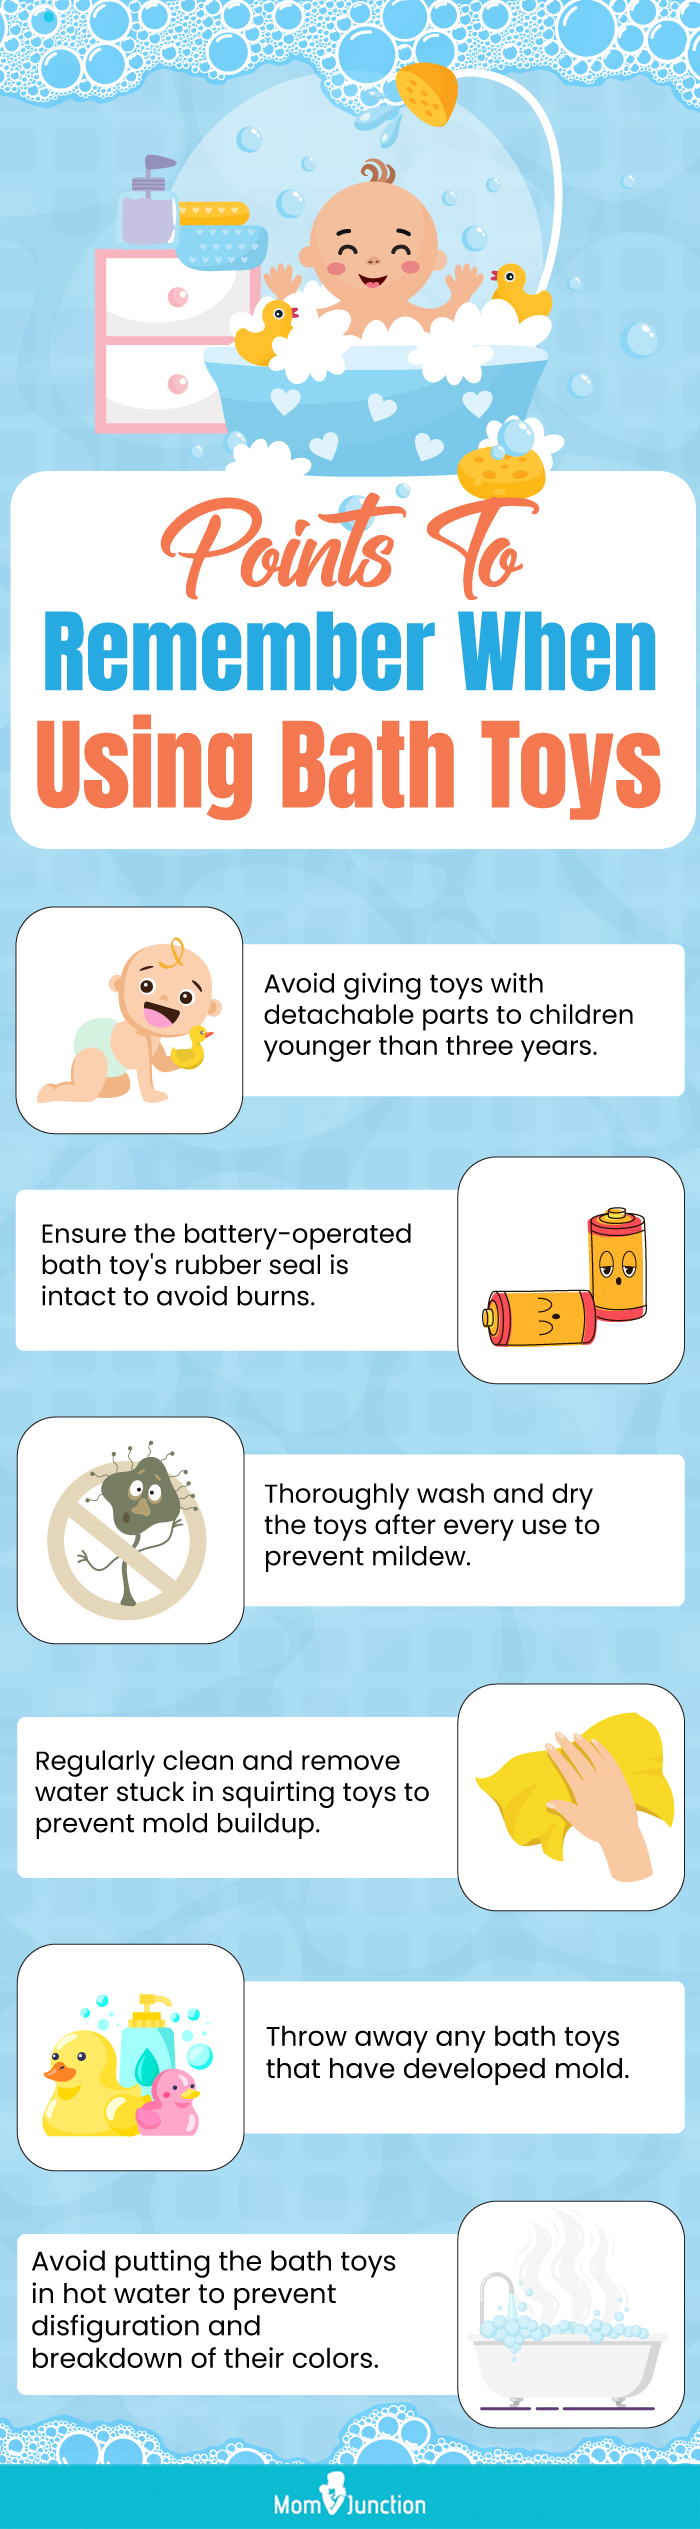 Points To Remember When Using Bath Toys (infographic)